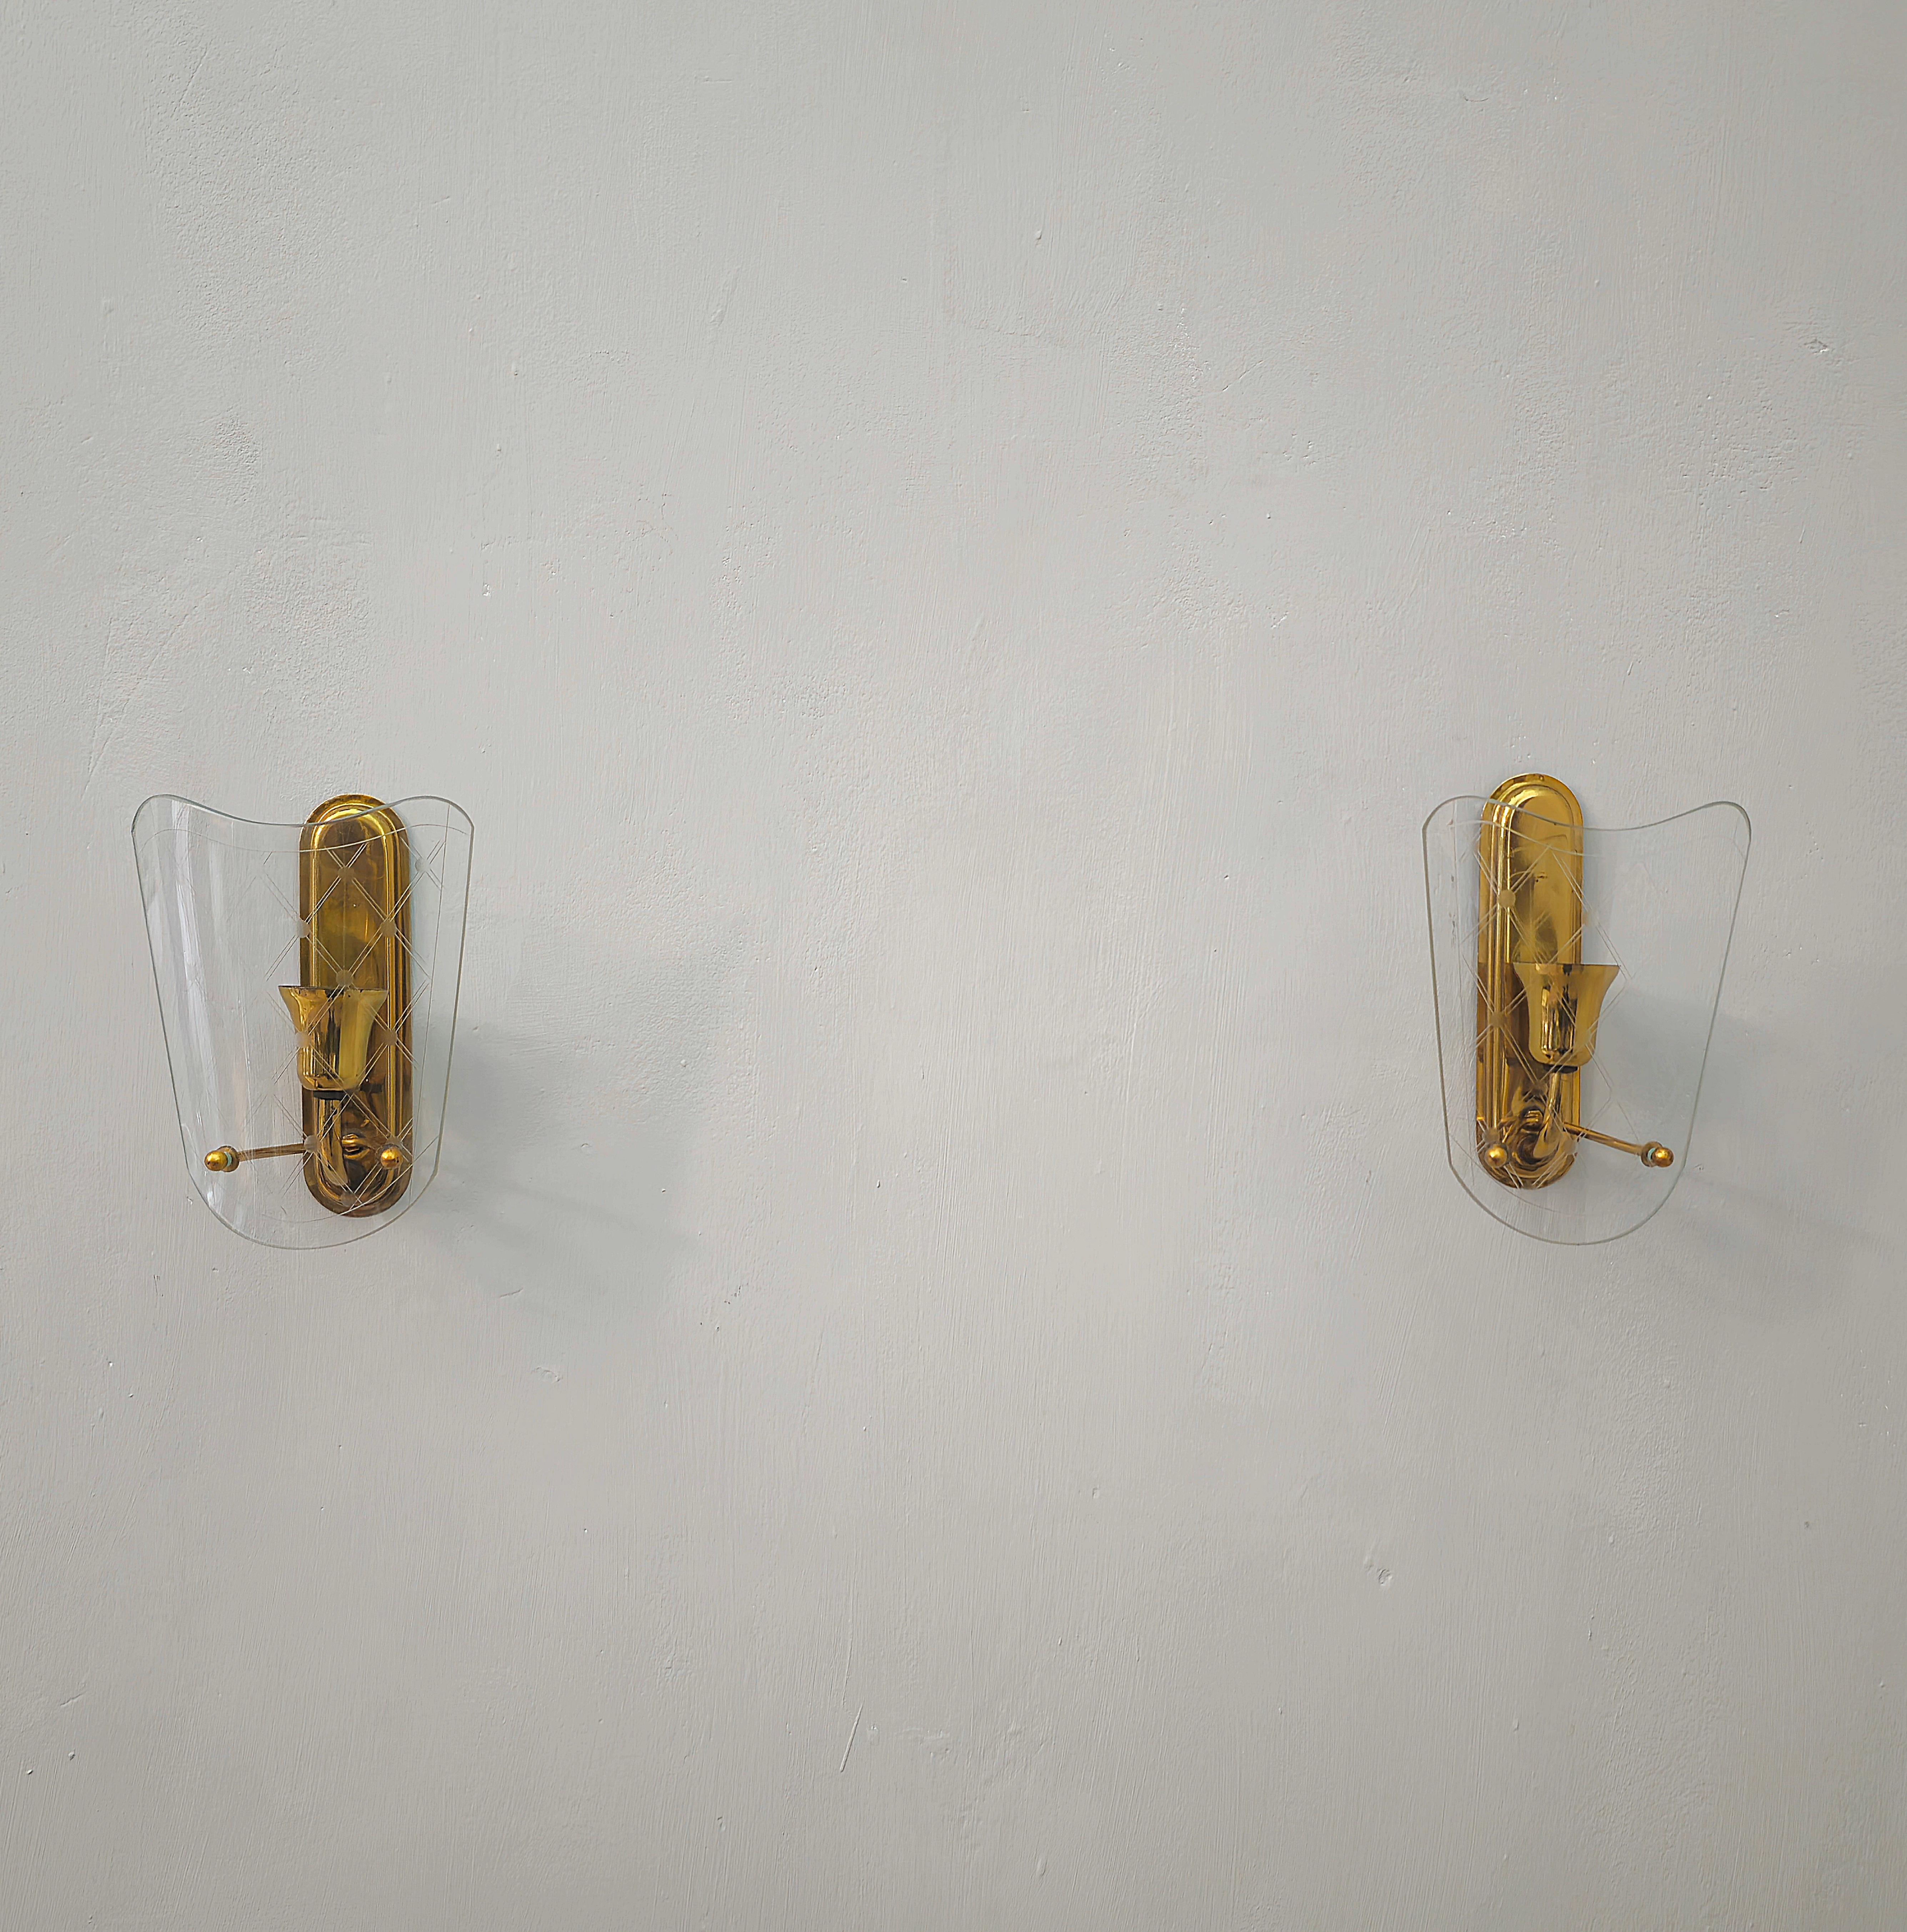 Pair of Wall Lights Sconces Brass Decorated Glass Midcentury Italian Design 1950 1